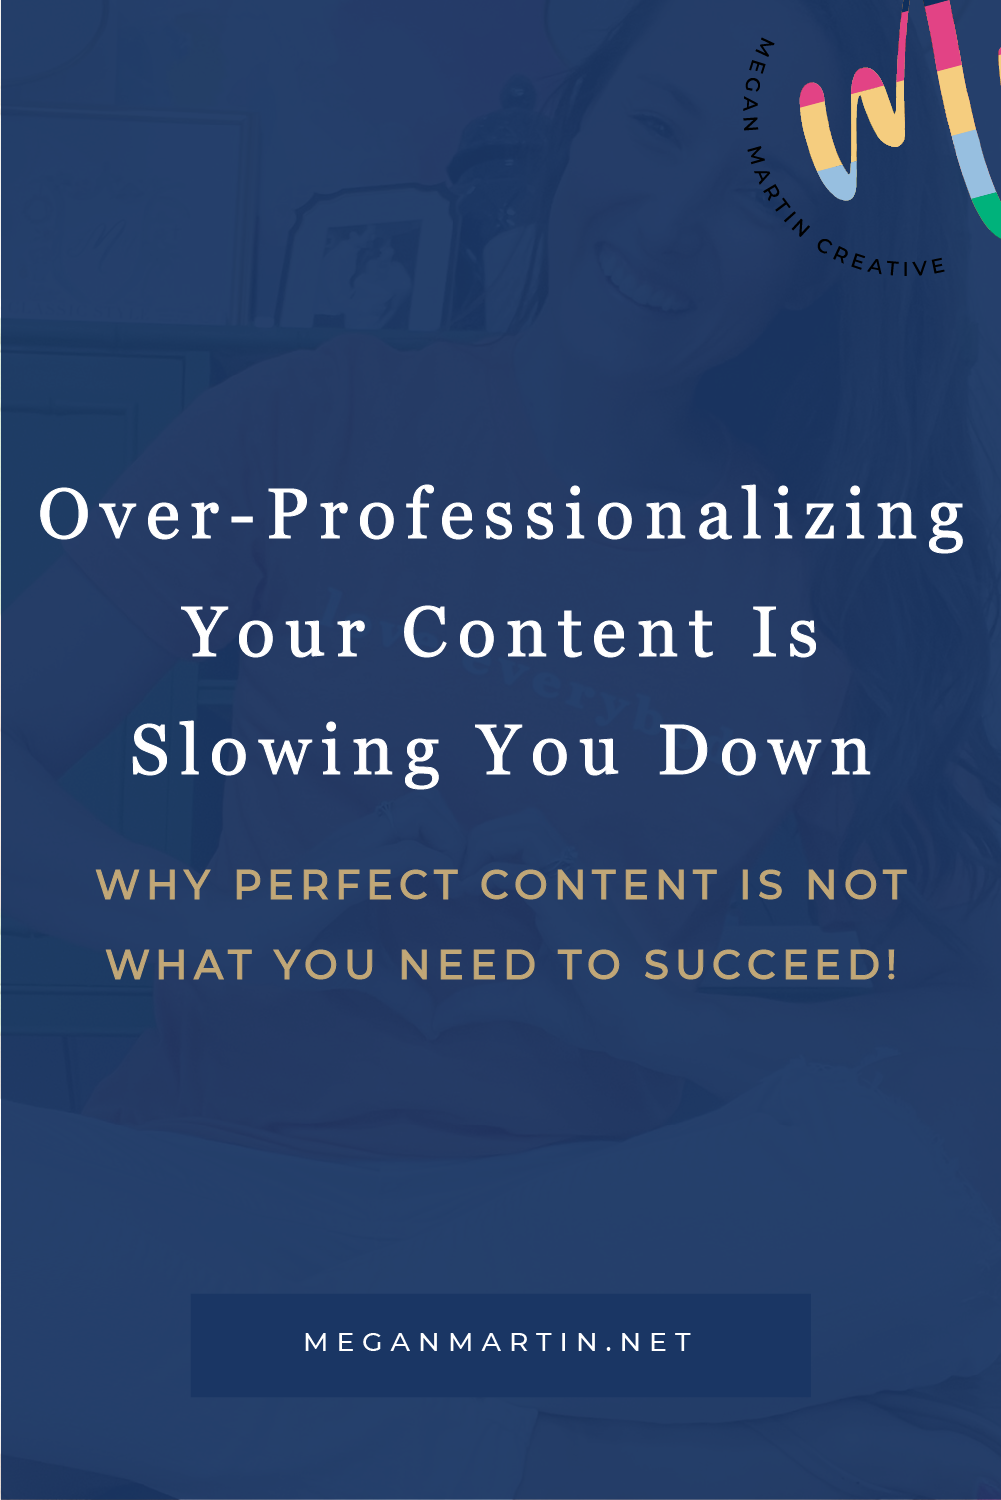 Over-Professionalizing Your Content Is Slowing You Down from creating and selling digital products in your service based business